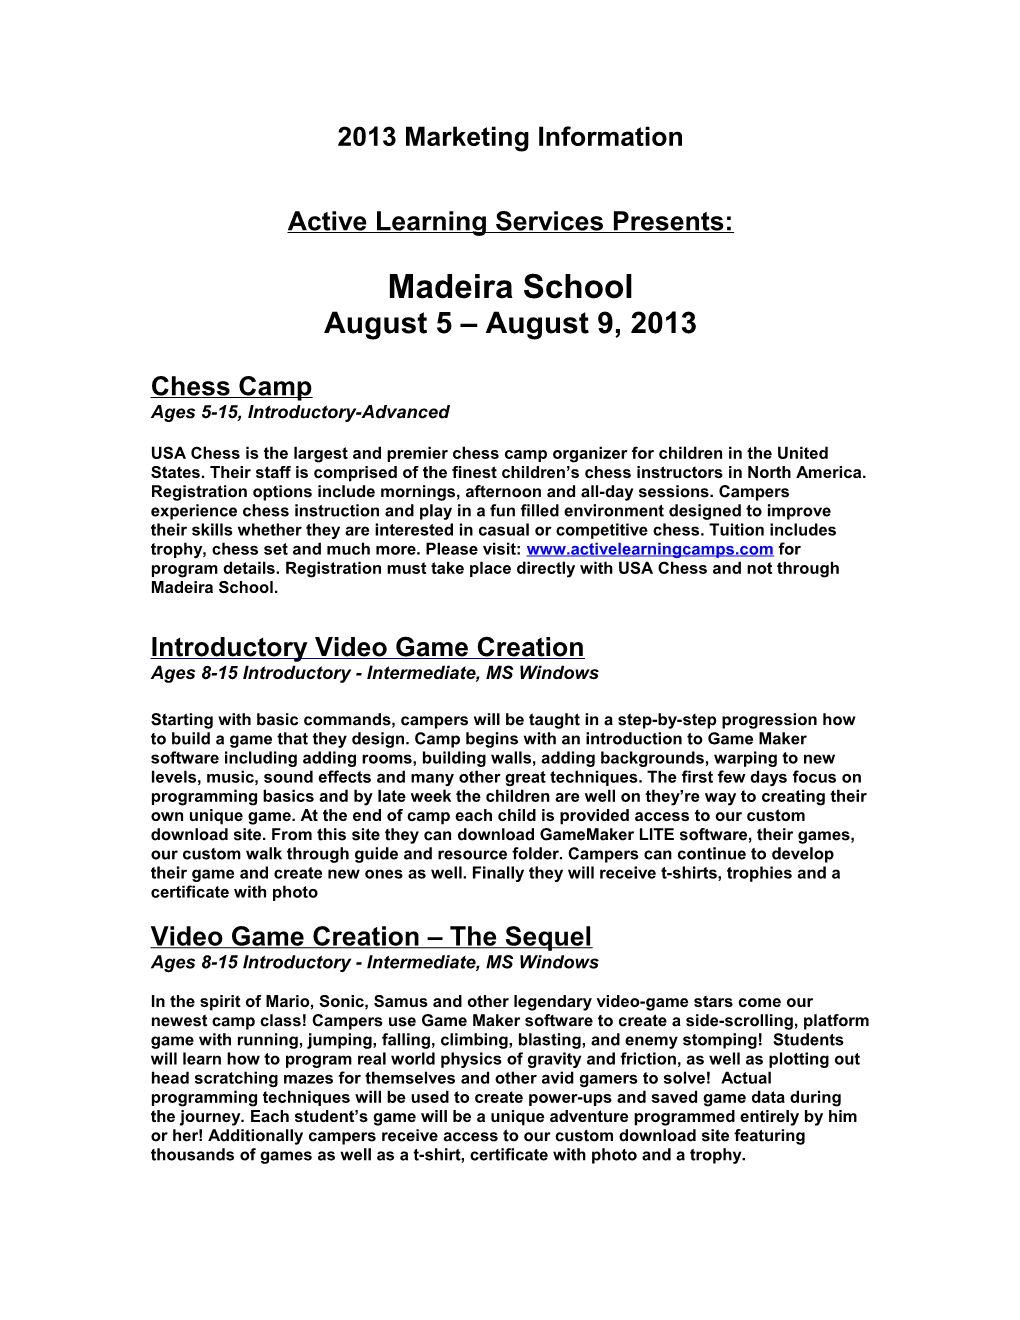 Active Learning Services Presents